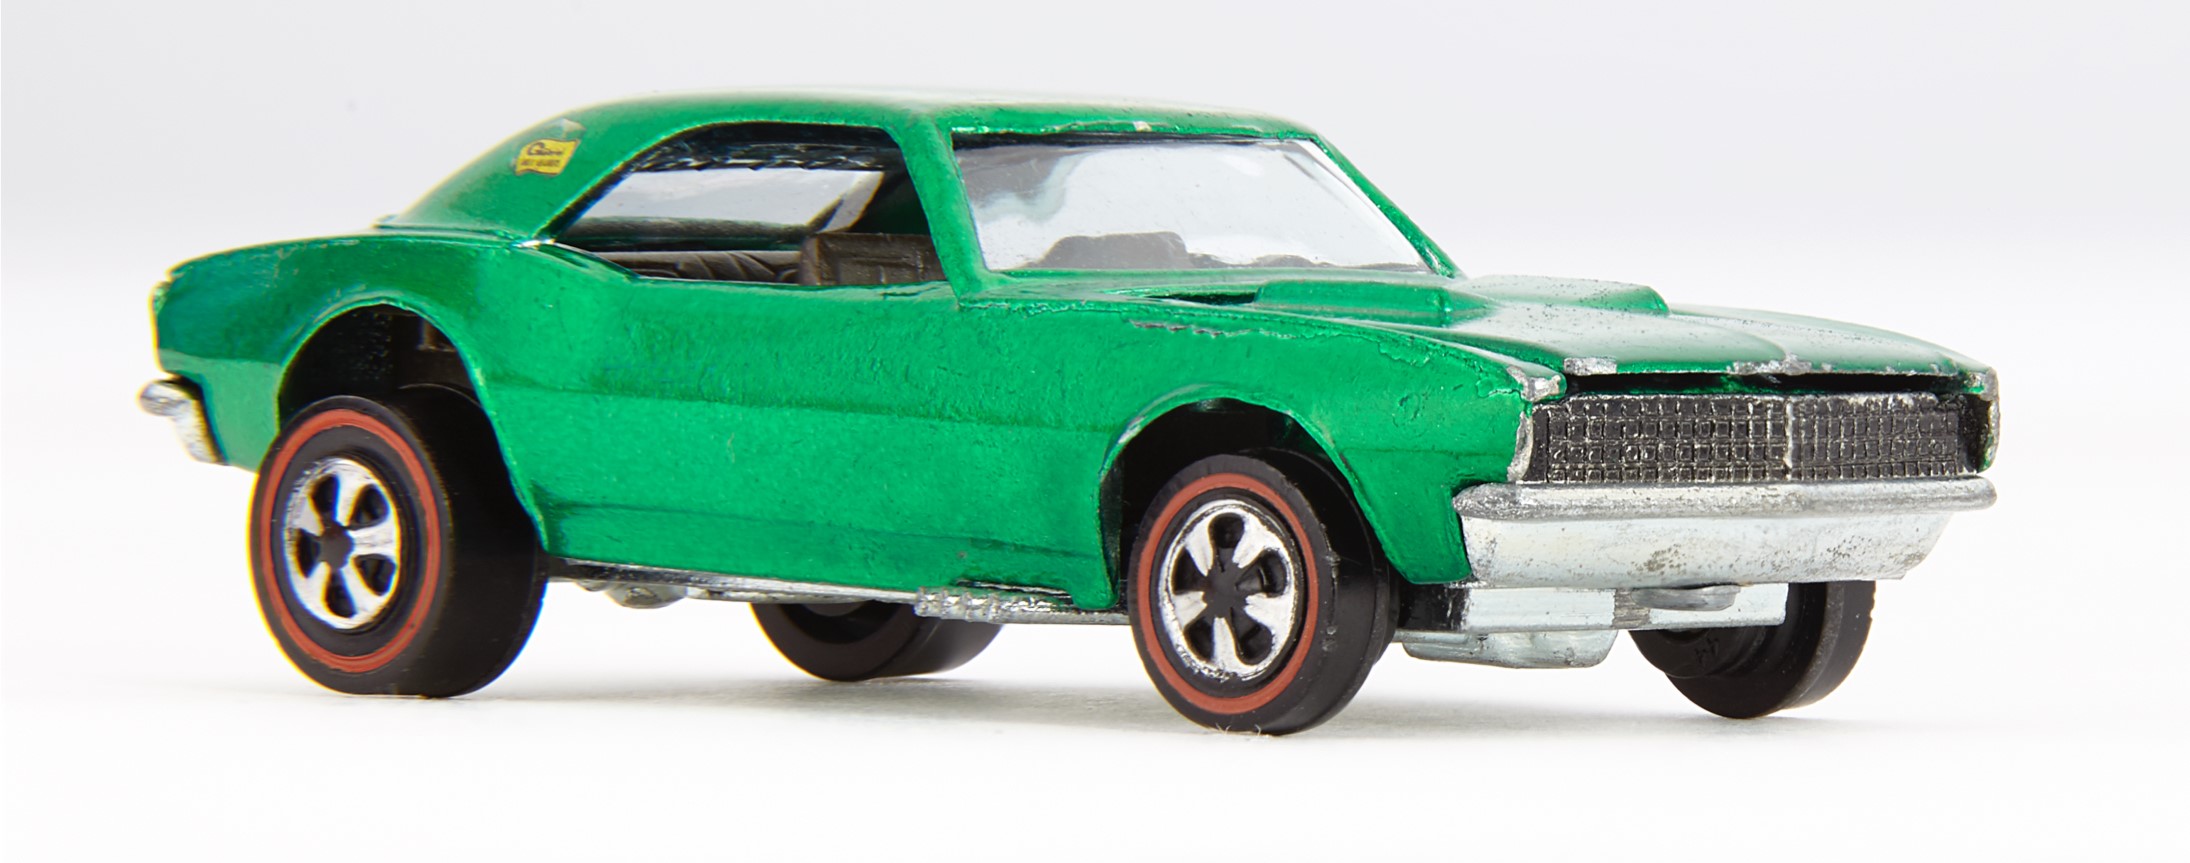 Hot Wheels: The Tiny Toy Cars That Inspired Millions of Gearheads Worldwide